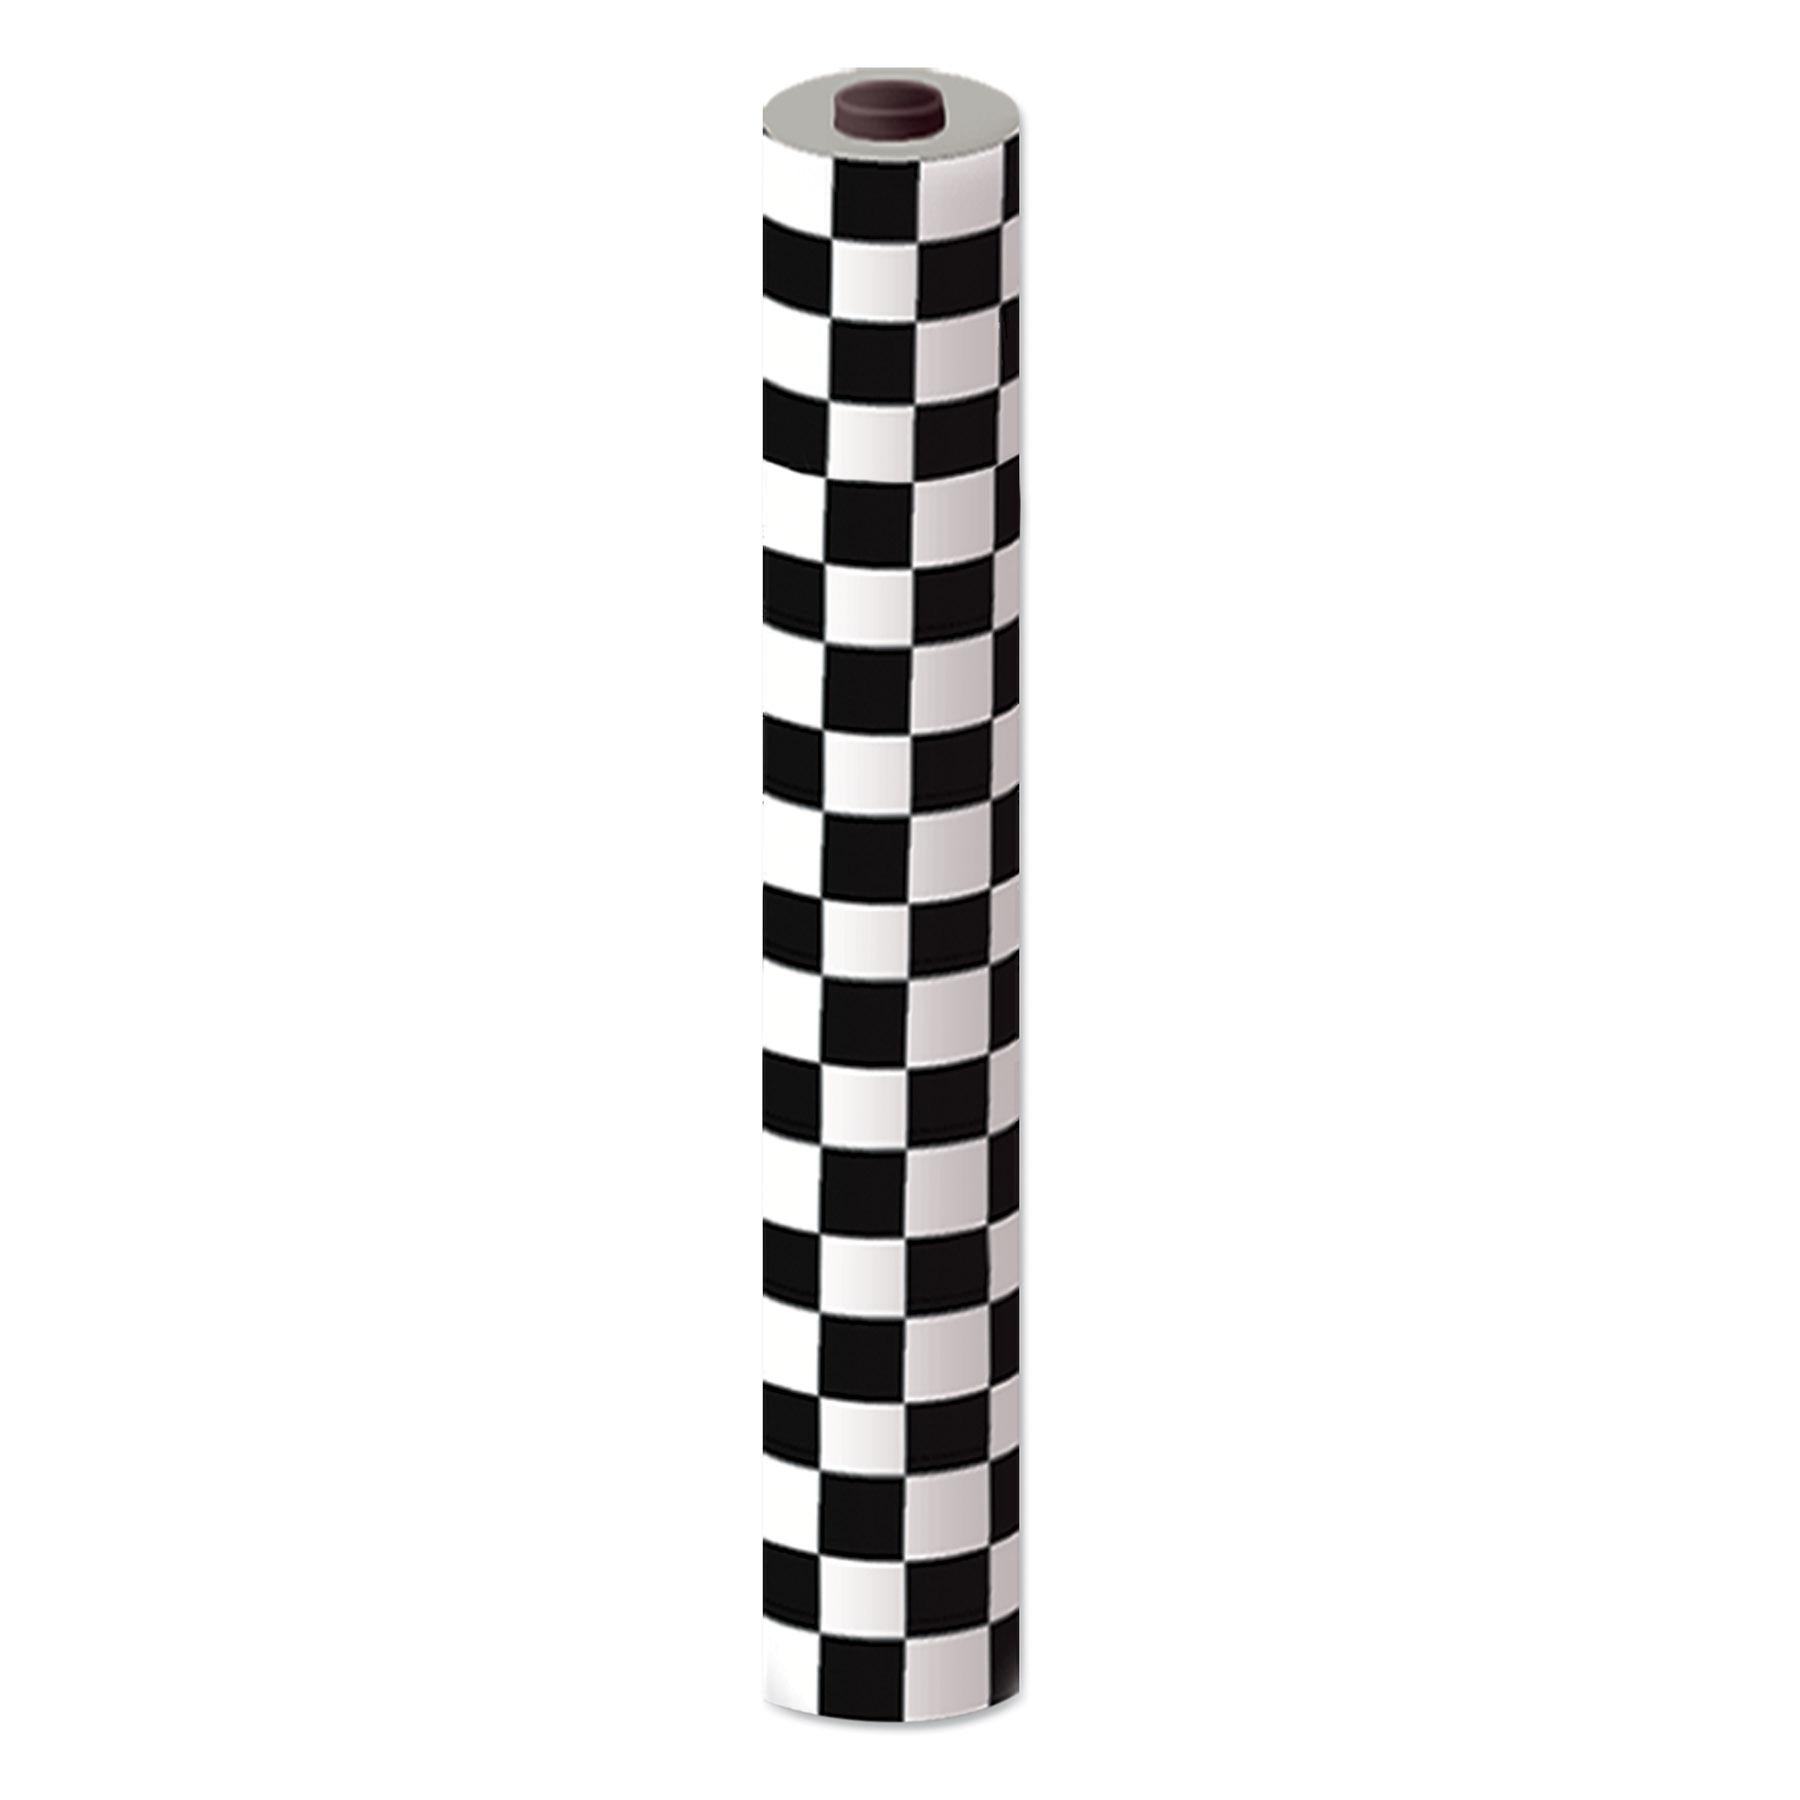 Beistle Black & White Plastic Checkered Party Table Roll